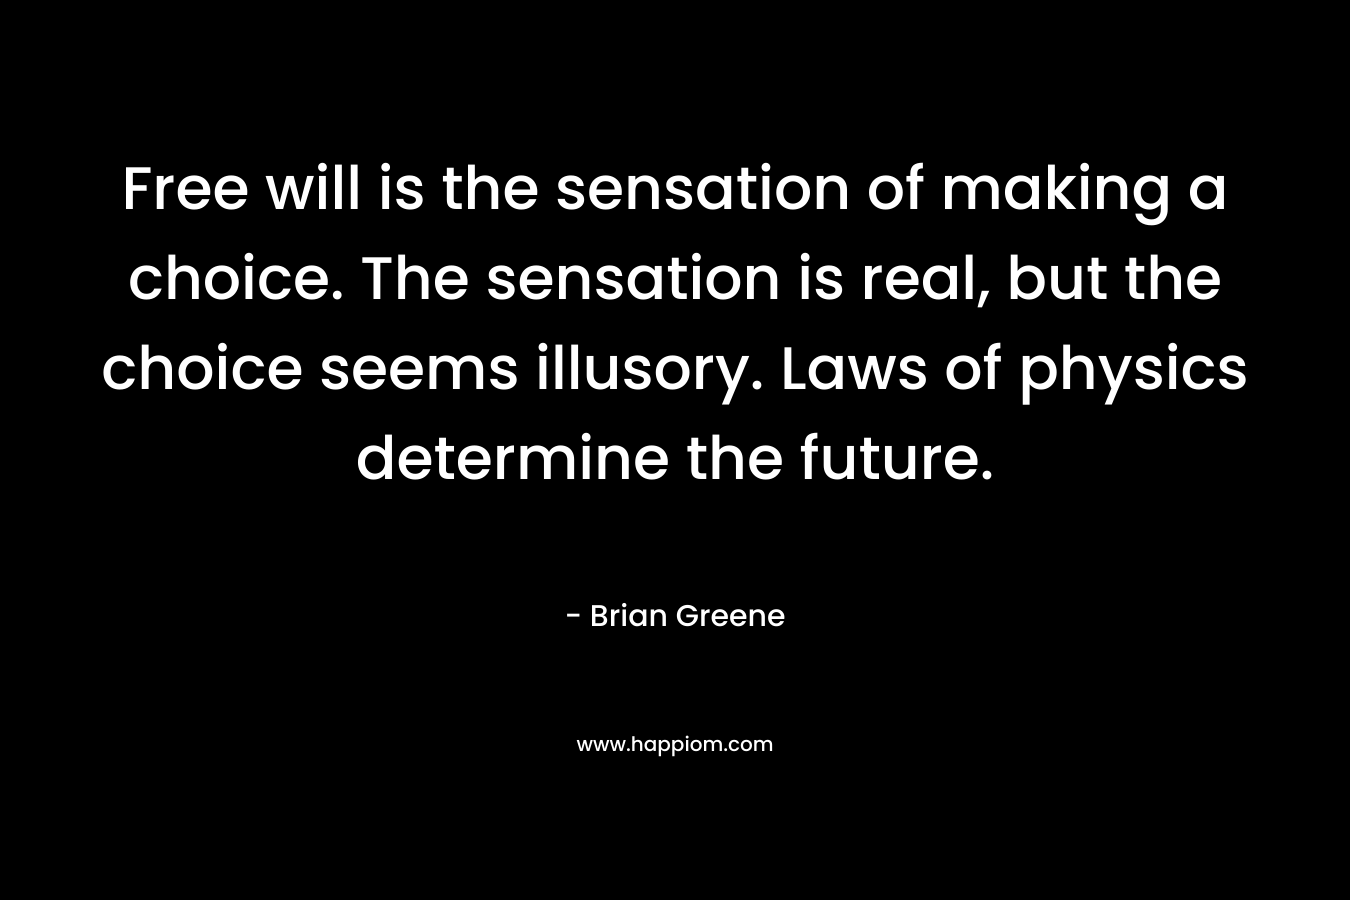 Free will is the sensation of making a choice. The sensation is real, but the choice seems illusory. Laws of physics determine the future. – Brian Greene